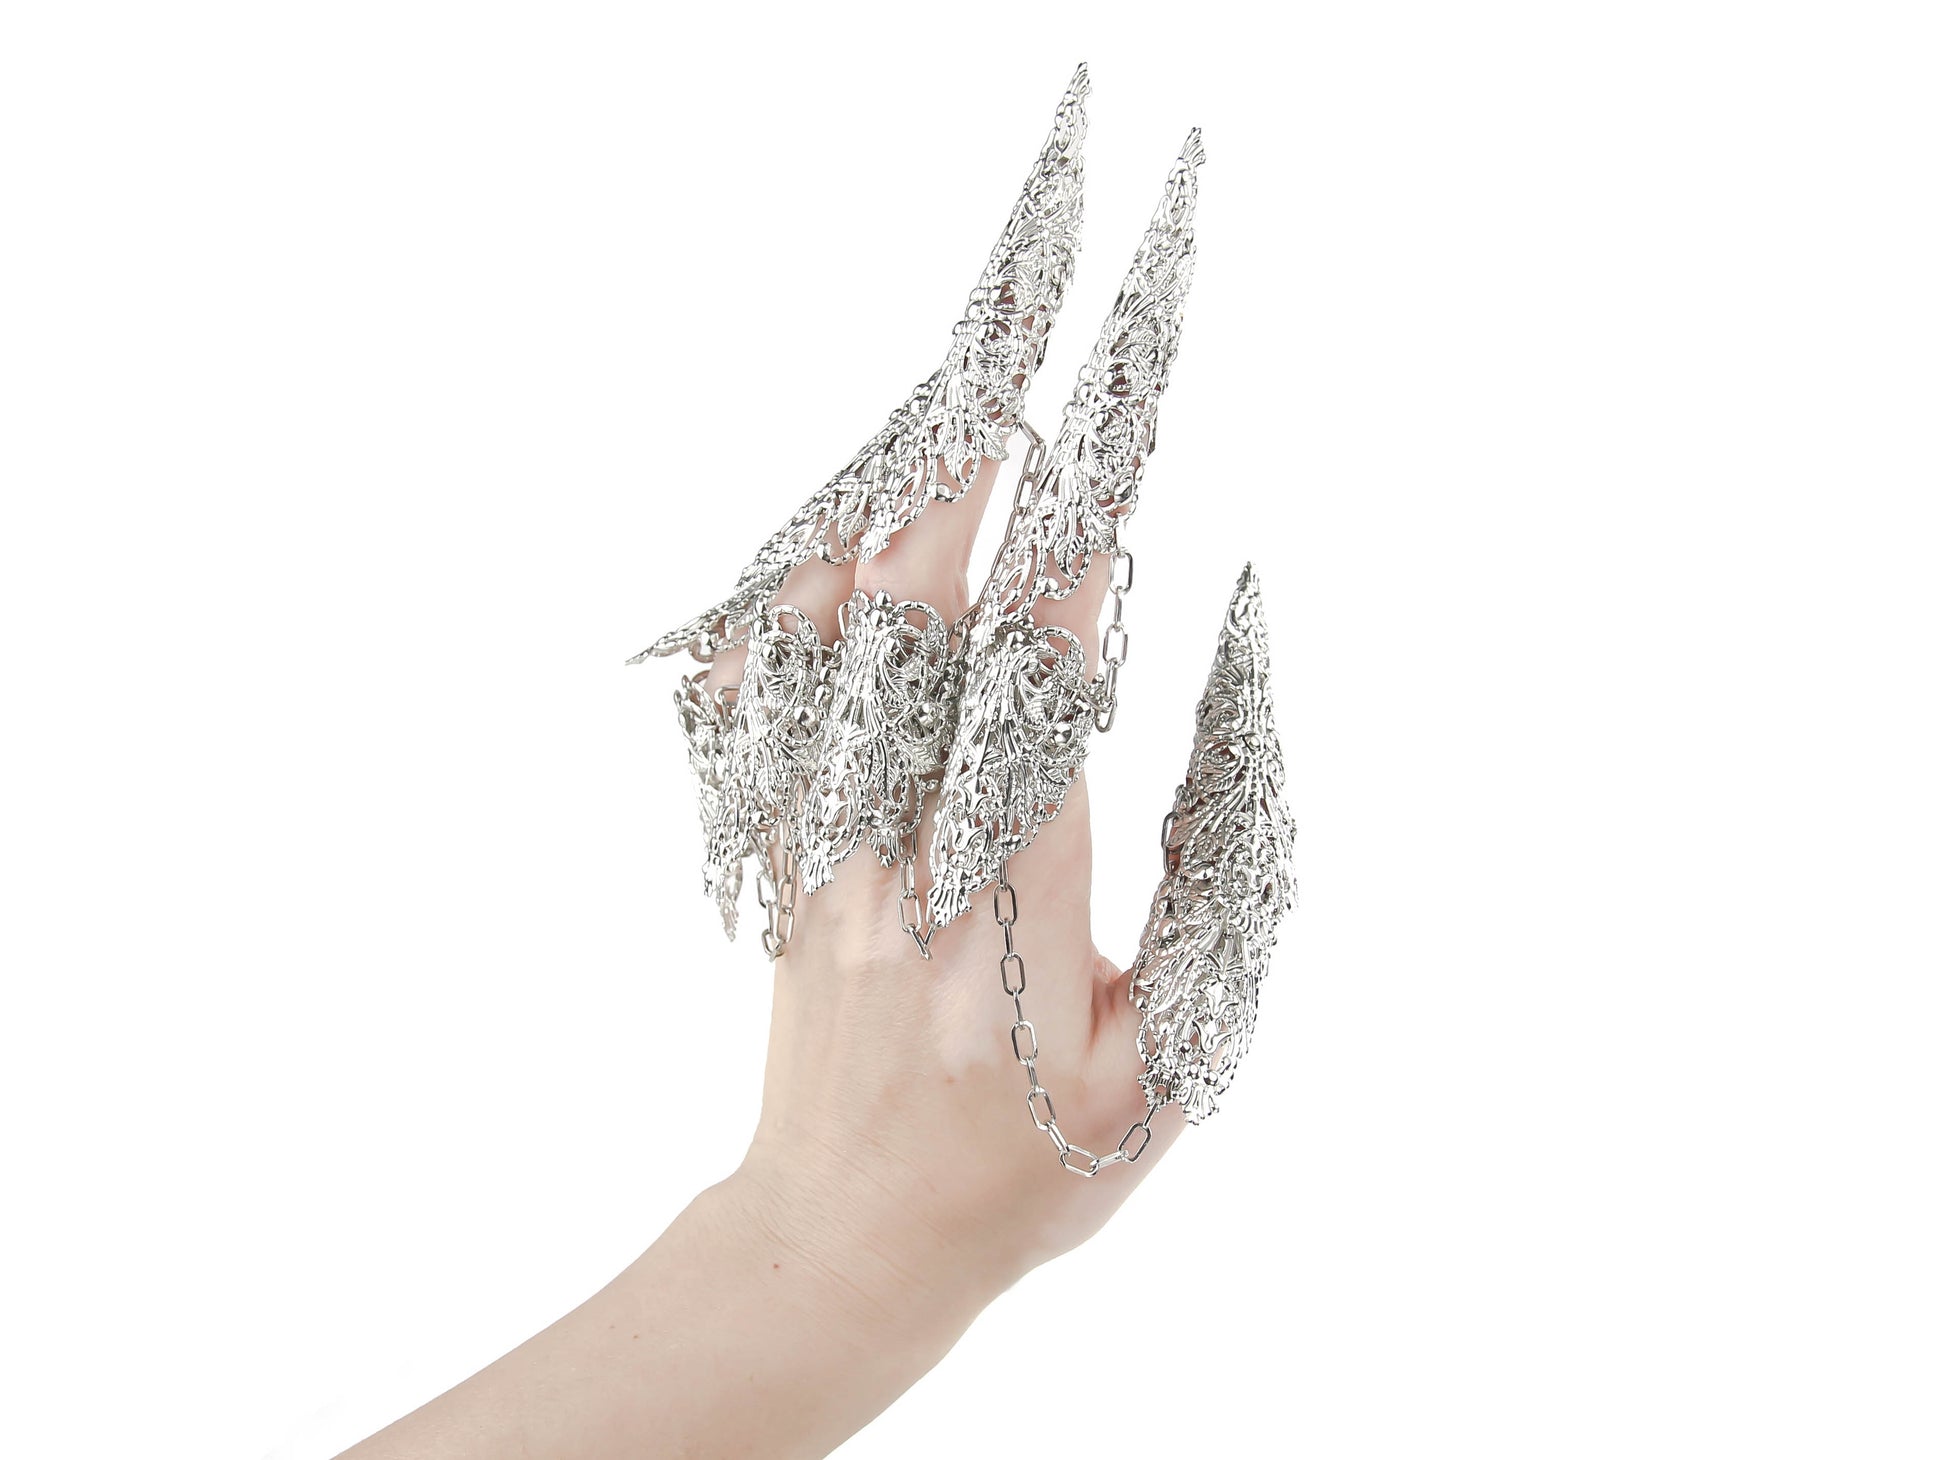 Striking dragon-like claw ring set from Myril Jewels, crafted for those who dare to embrace the dark, avant-garde side of neo-gothic jewelry. This bold accessory is perfect for Halloween, rave parties, or simply making a statement in everyday goth style, and it also serves as an unforgettable goth girlfriend gift.